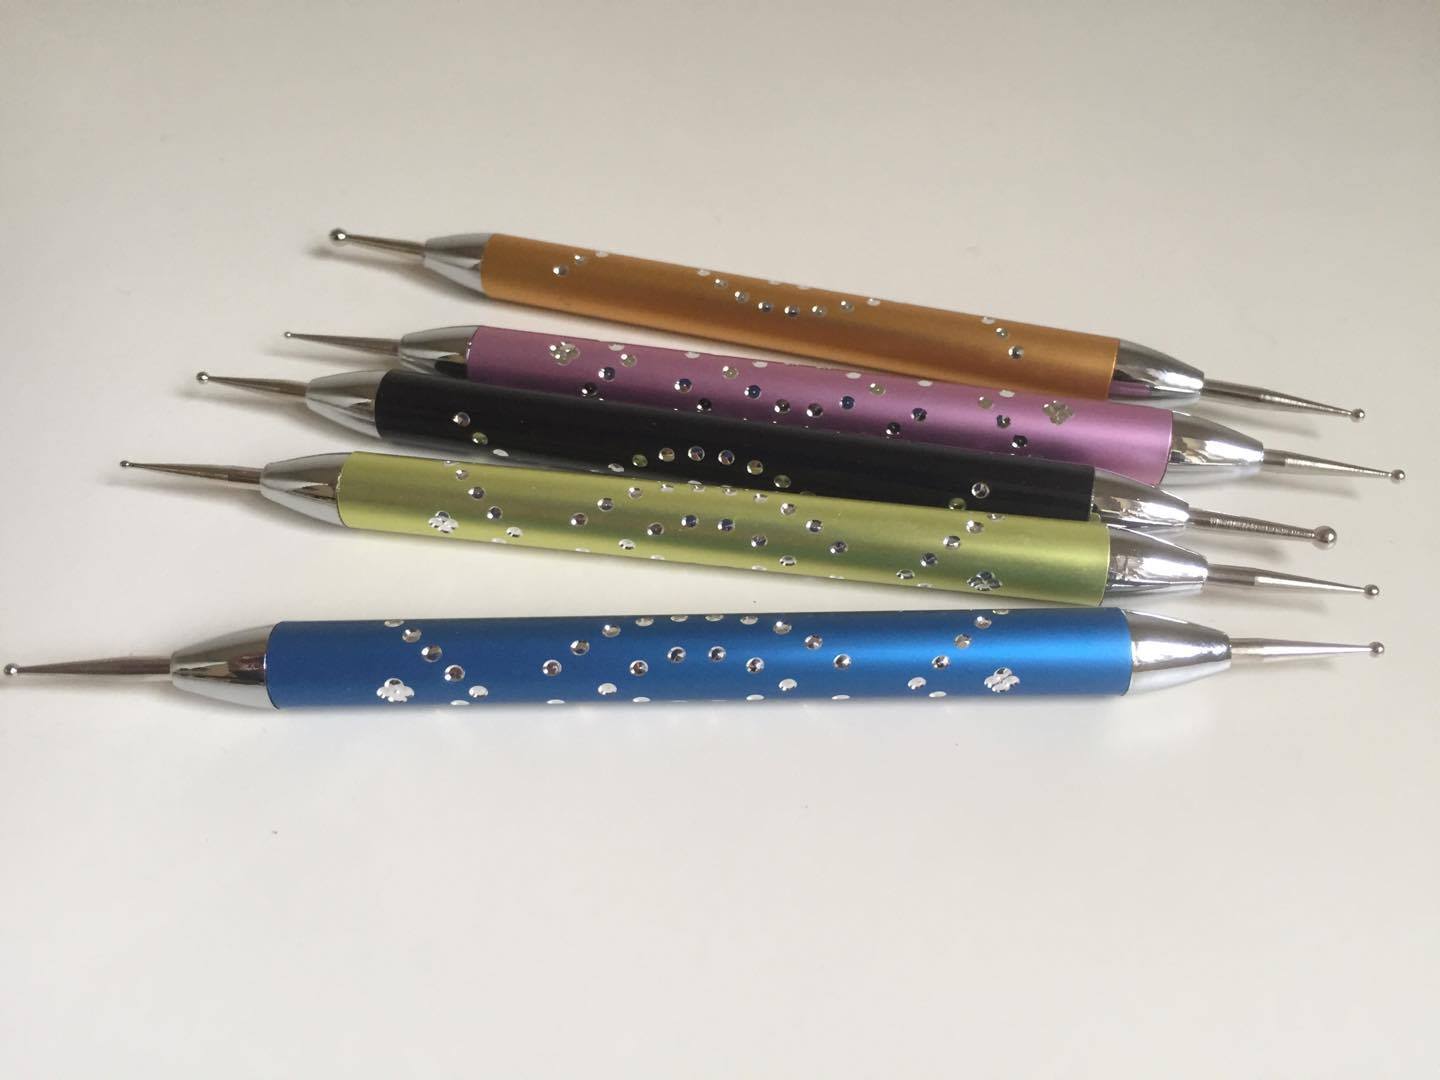 2. 15 Pieces Nail Art Brushes Set, 5 Pieces Nail Dotting Pen, 5 Pieces Nail Painting Brushes, 3 Pieces Nail Liner Brushes, 1 Piece Nail Brush Holder, 1 Piece Nail File, 1 Piece Nail Buffer, 1 Piece Cuticle Pusher - wide 9